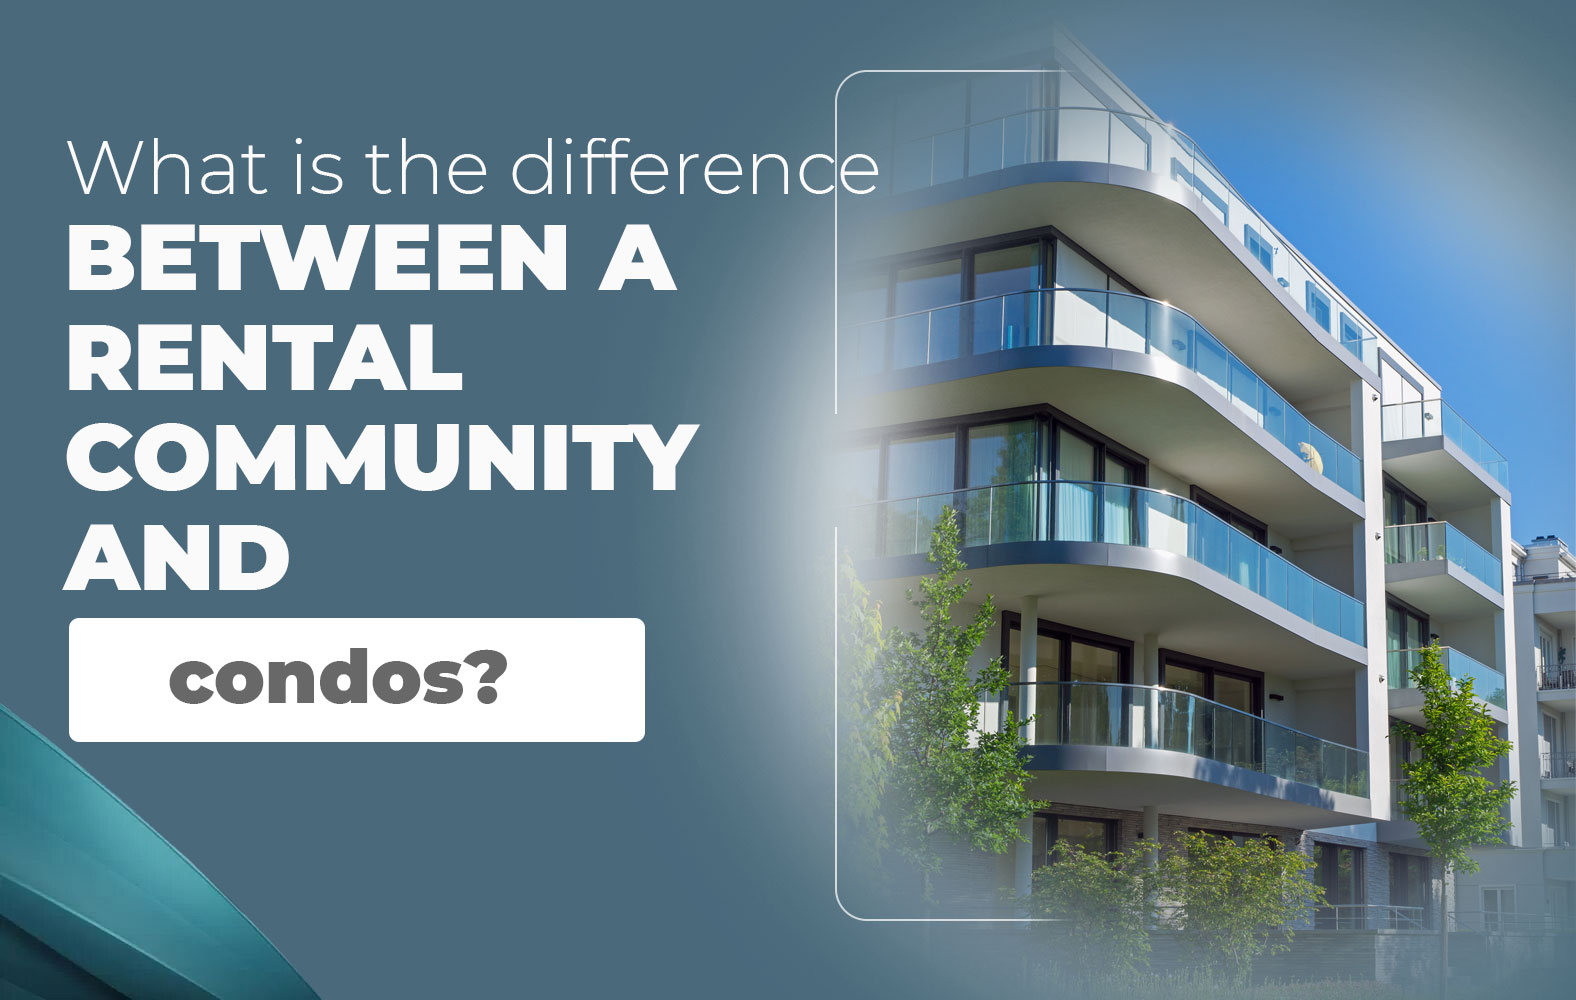 What is the difference between a rental community and condos?